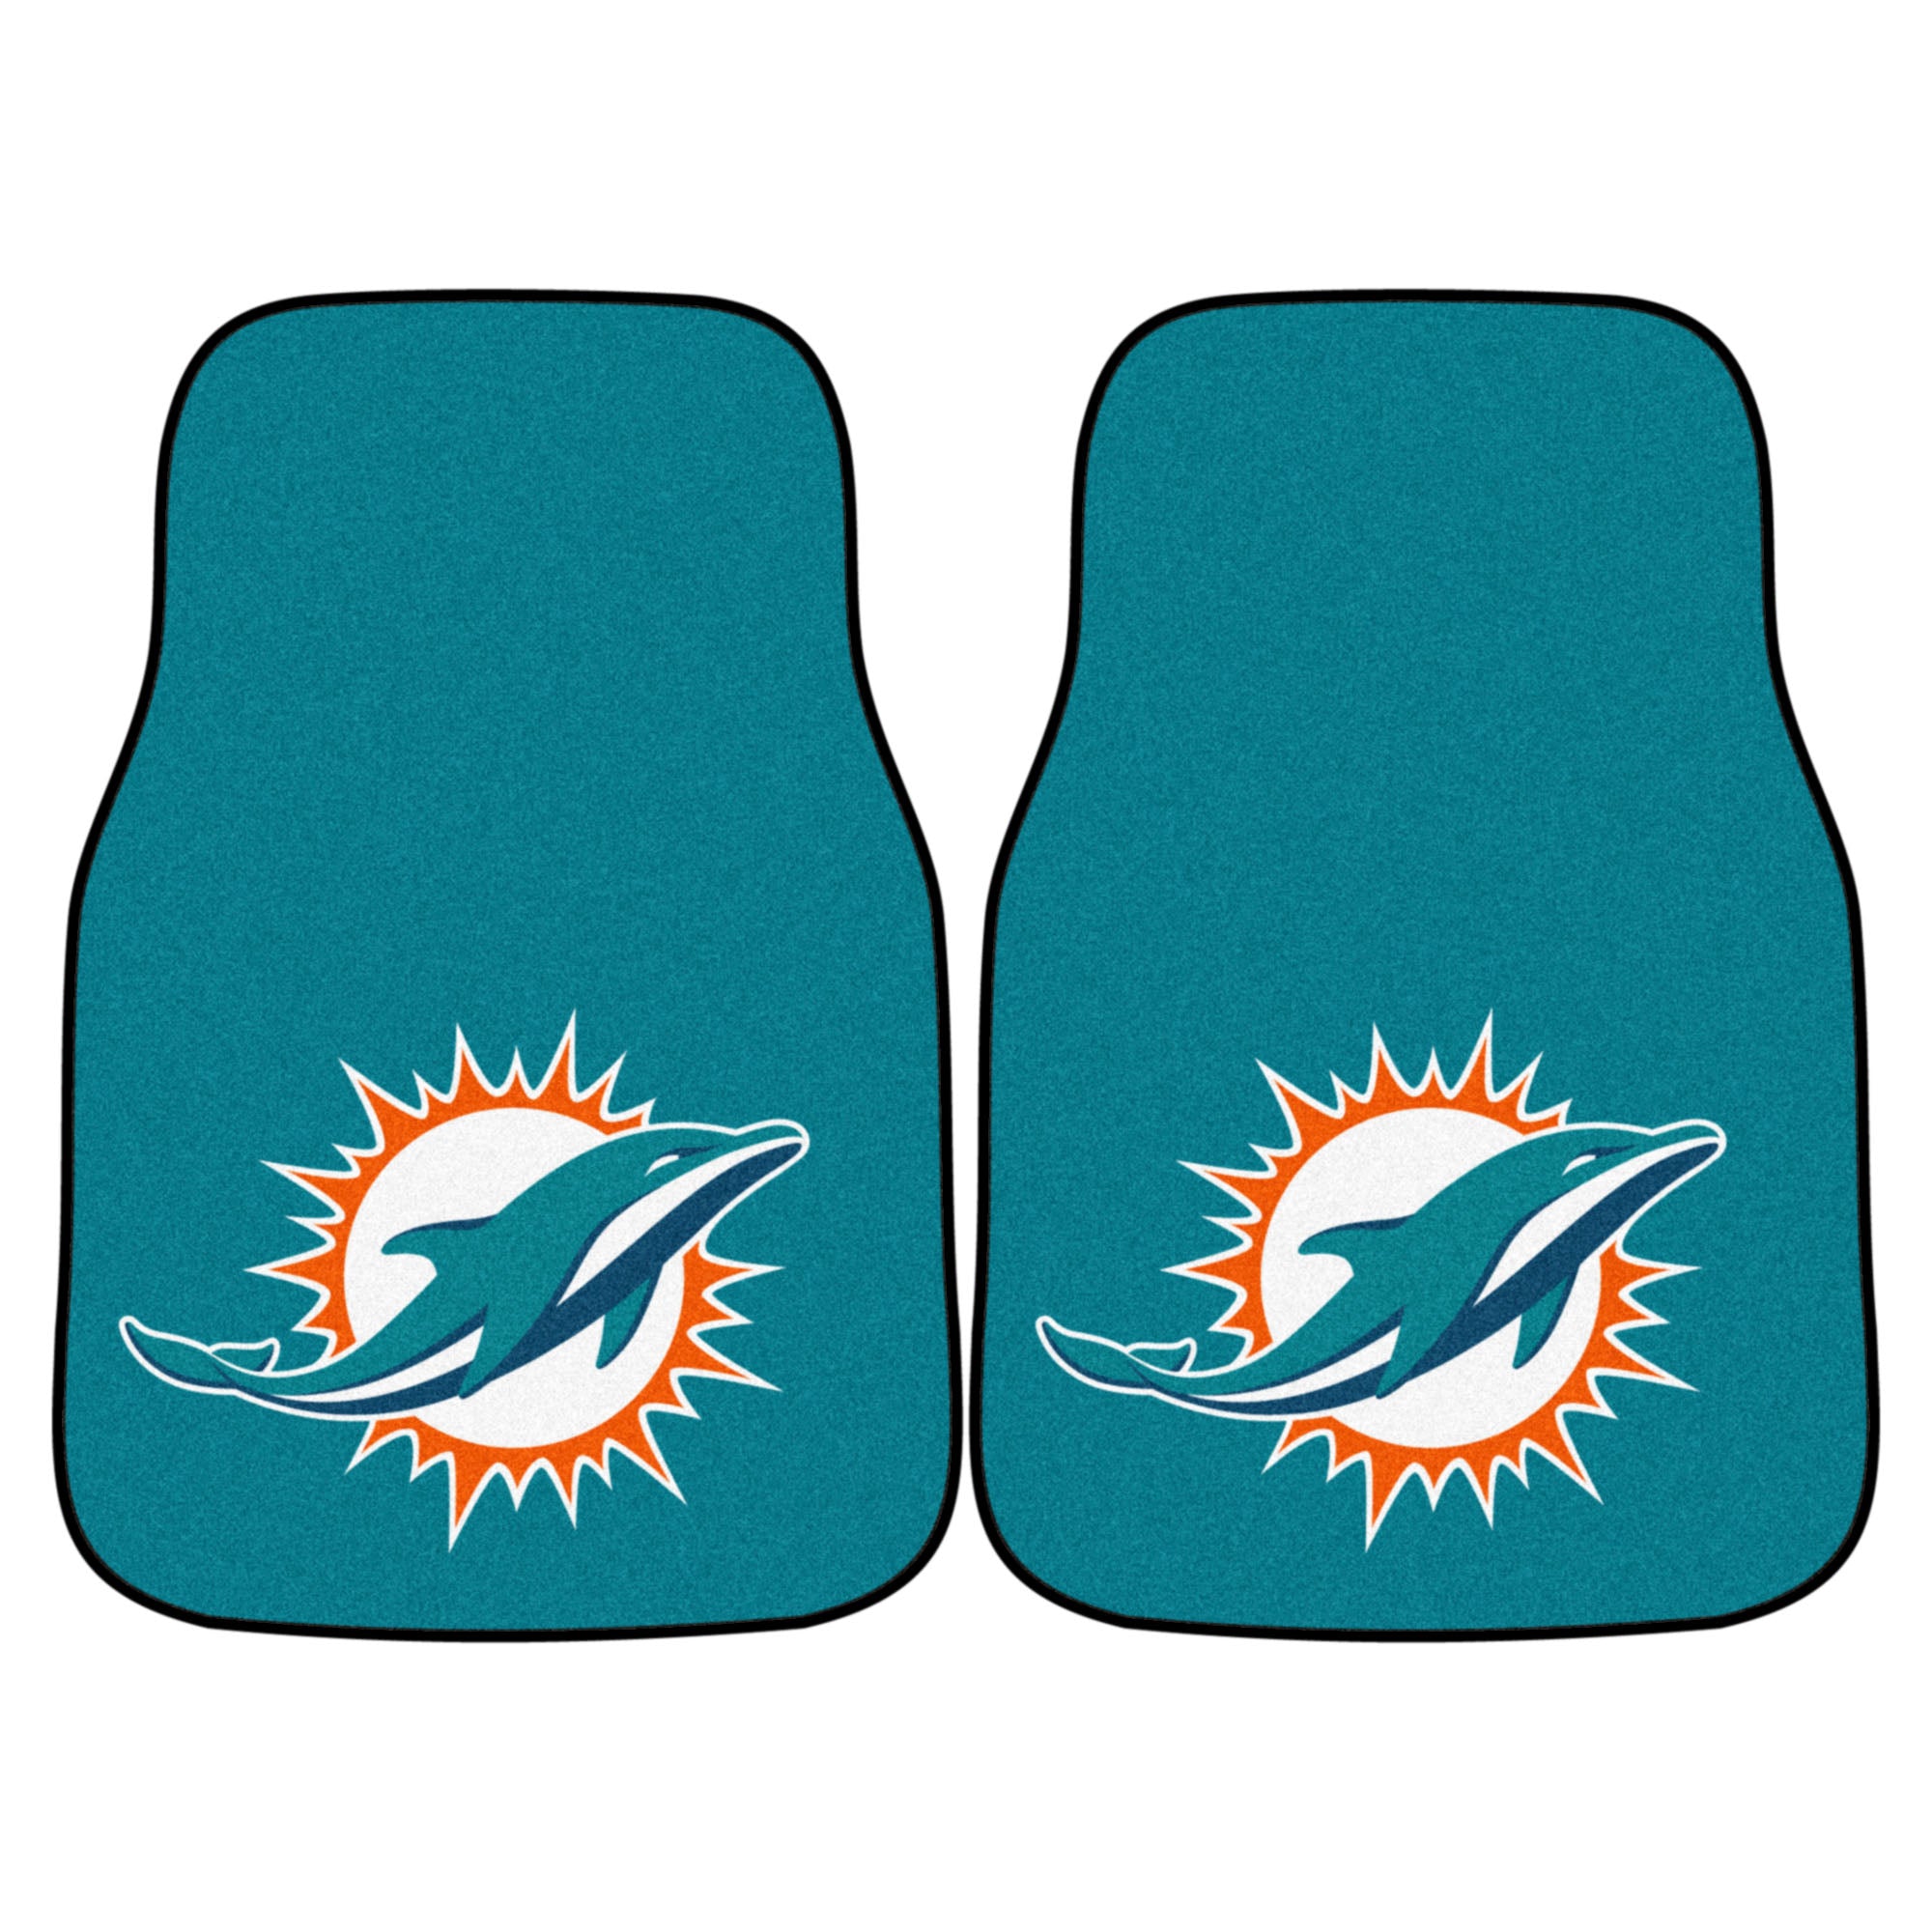 miami dolphins 3d seat viewer